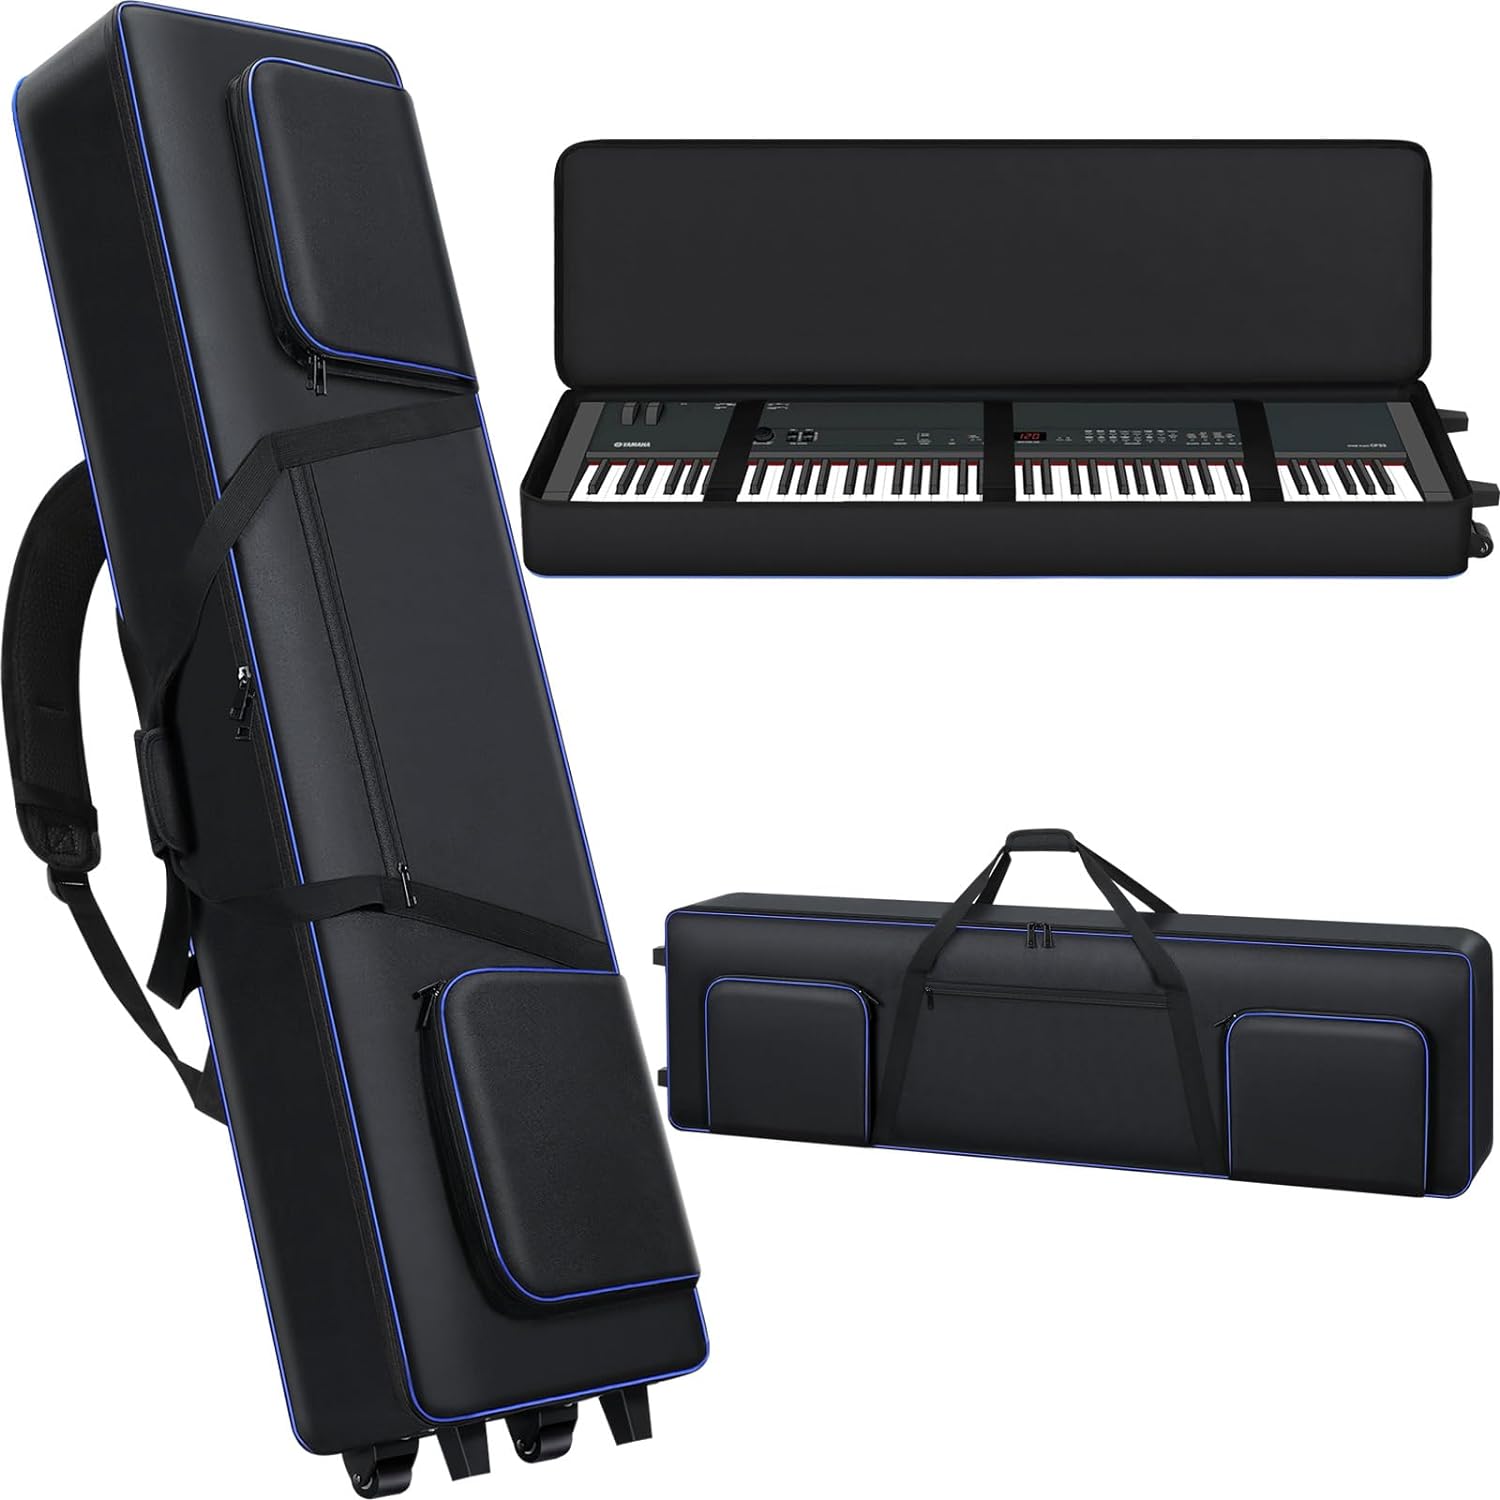 88 Key Keyboard Case with Wheels (53″x14.5″x7″) | 88 Key Keyboard Rolling Bag with 3-Pocket | Padded Piano Case Keyboard Gig-Bag with Handles & Adjustable Shoulder Straps